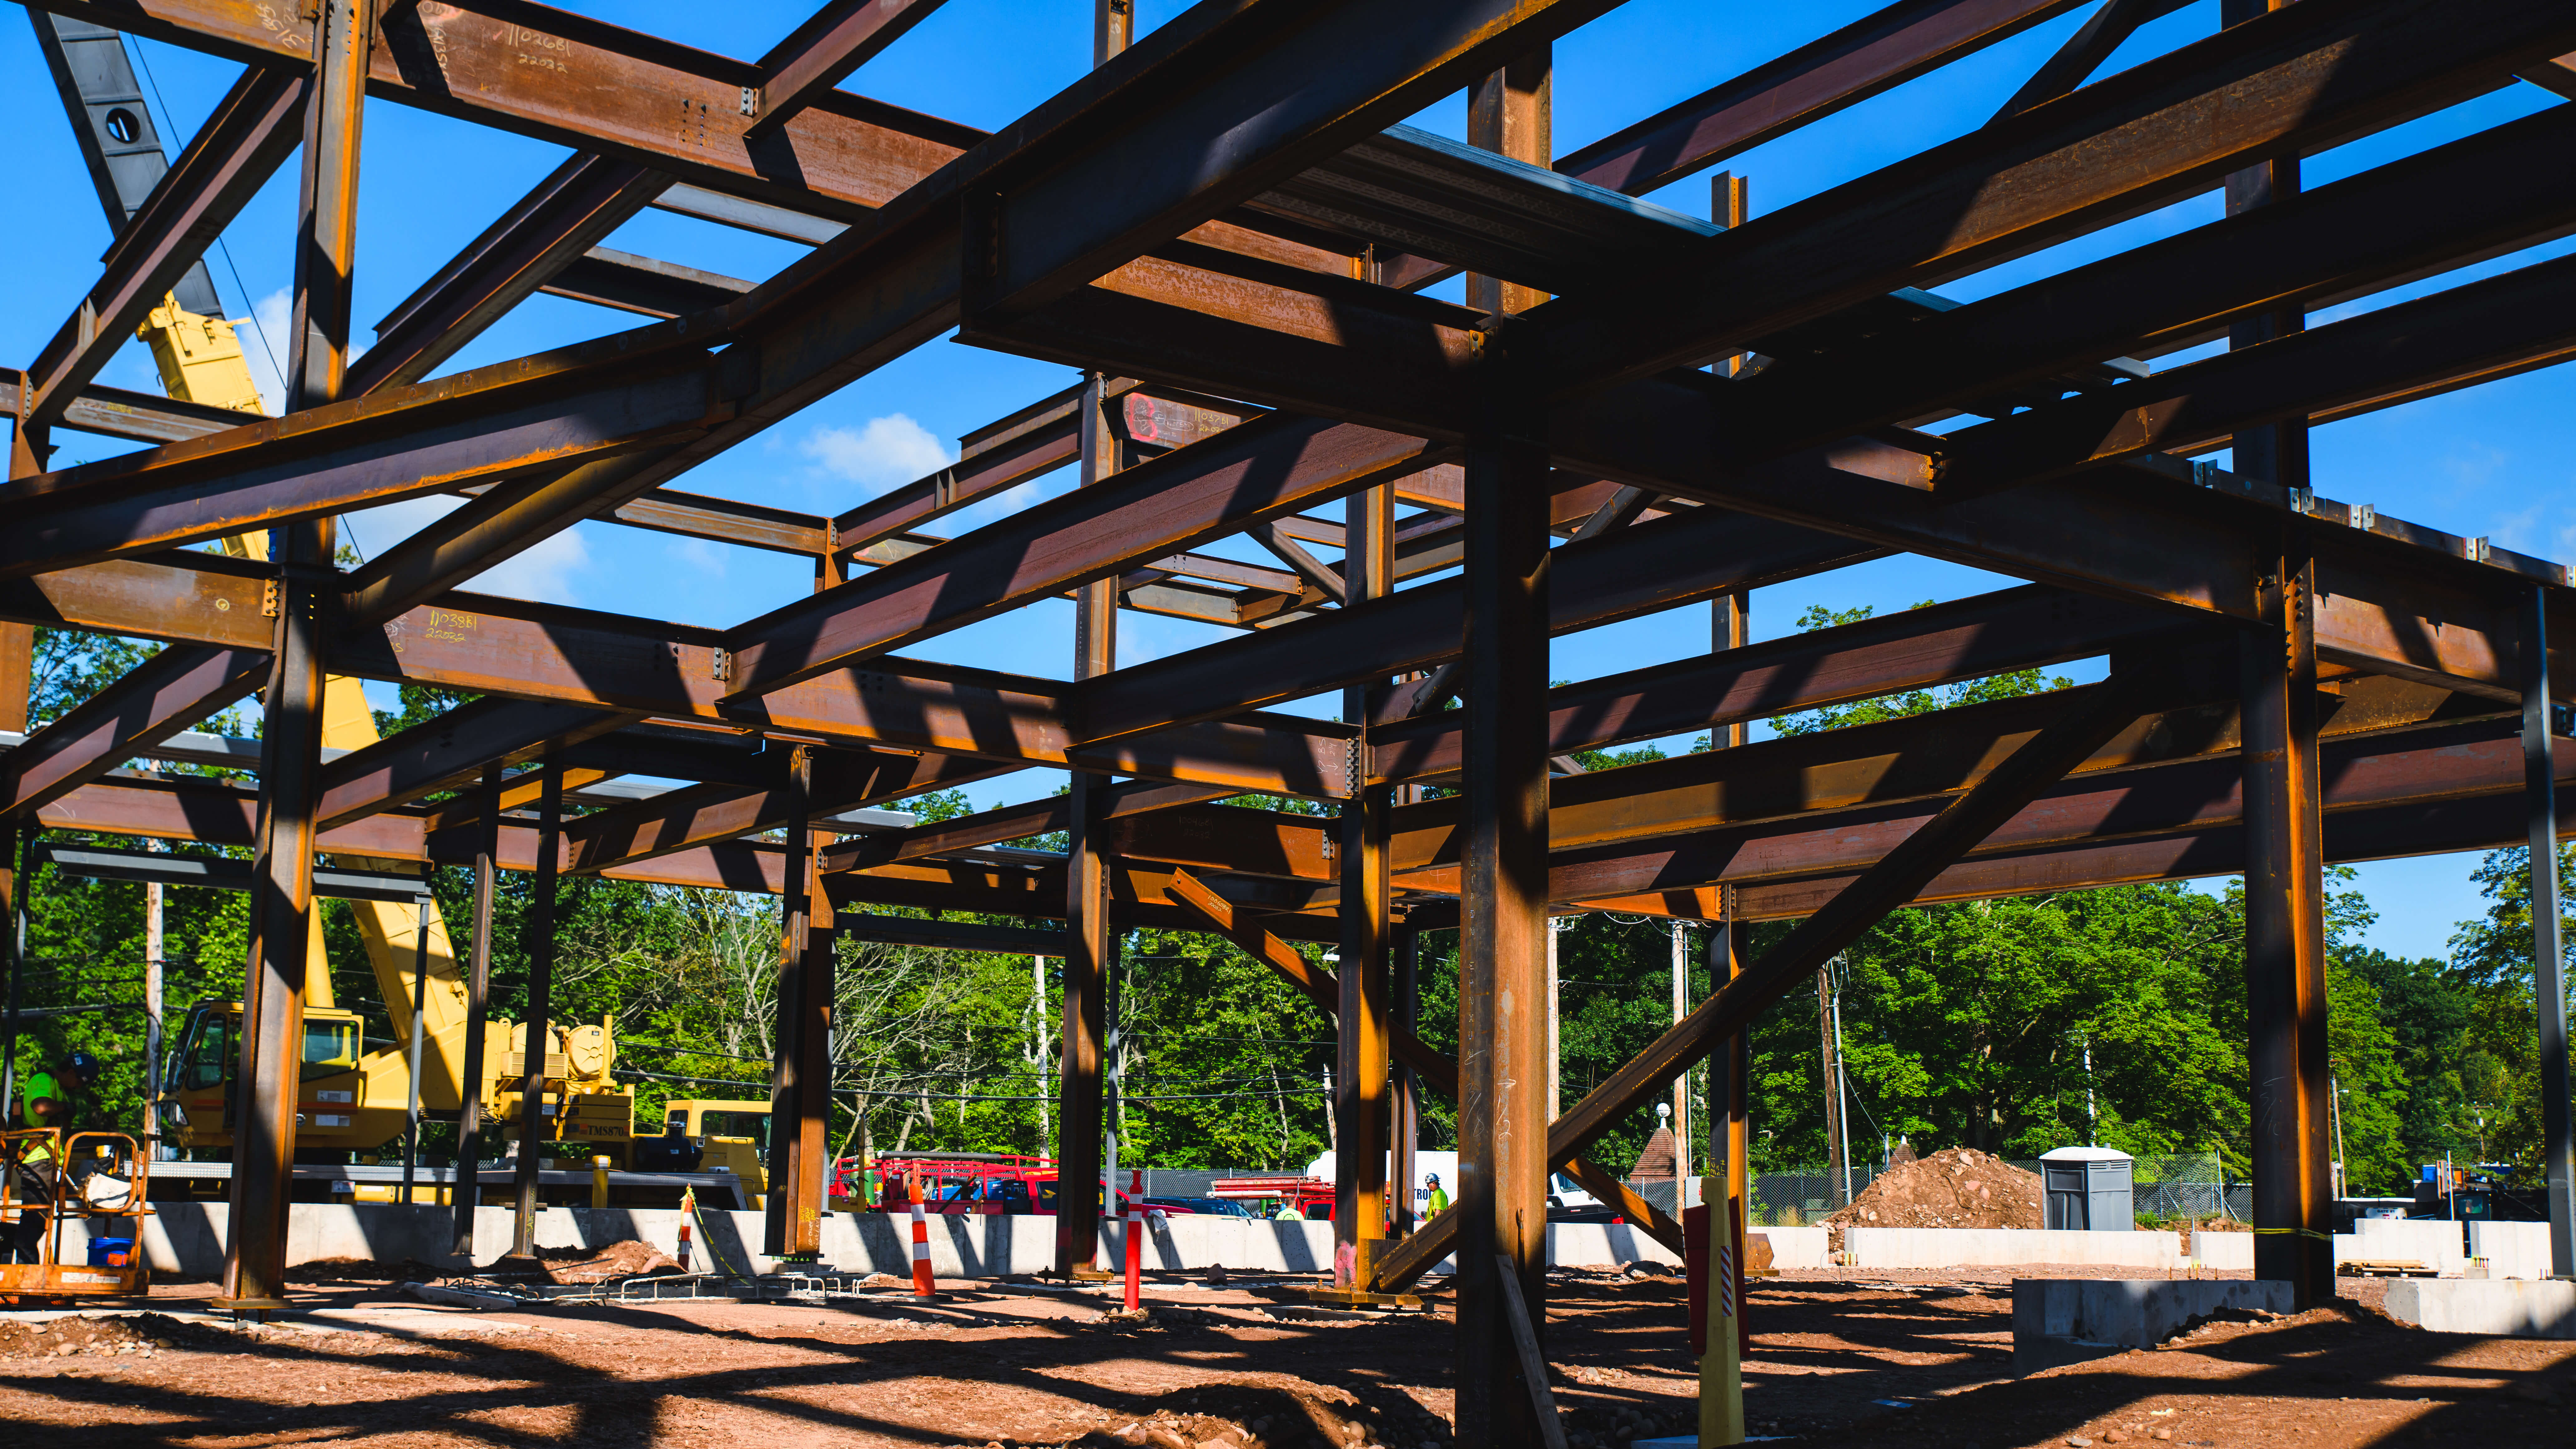 The structural supports of the new south quad